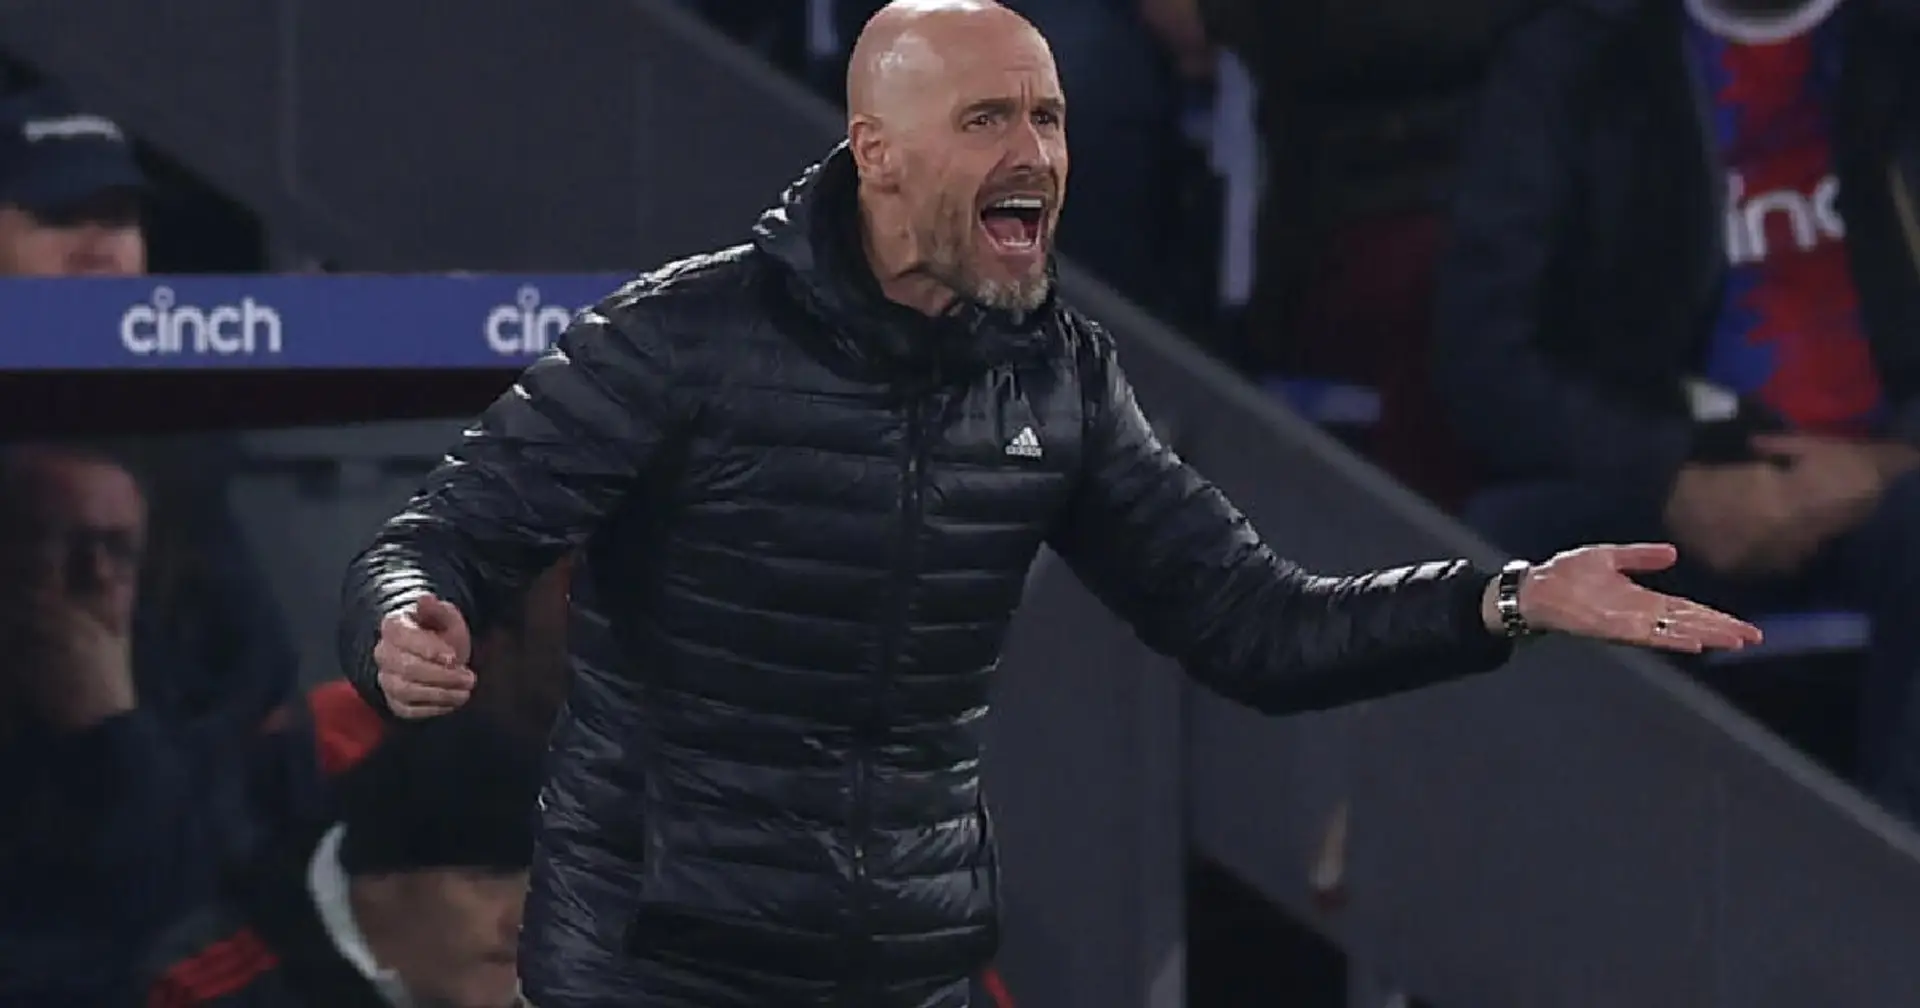 Revealed: What Ten Hag did at full time v Palace - his players applauded the fans 